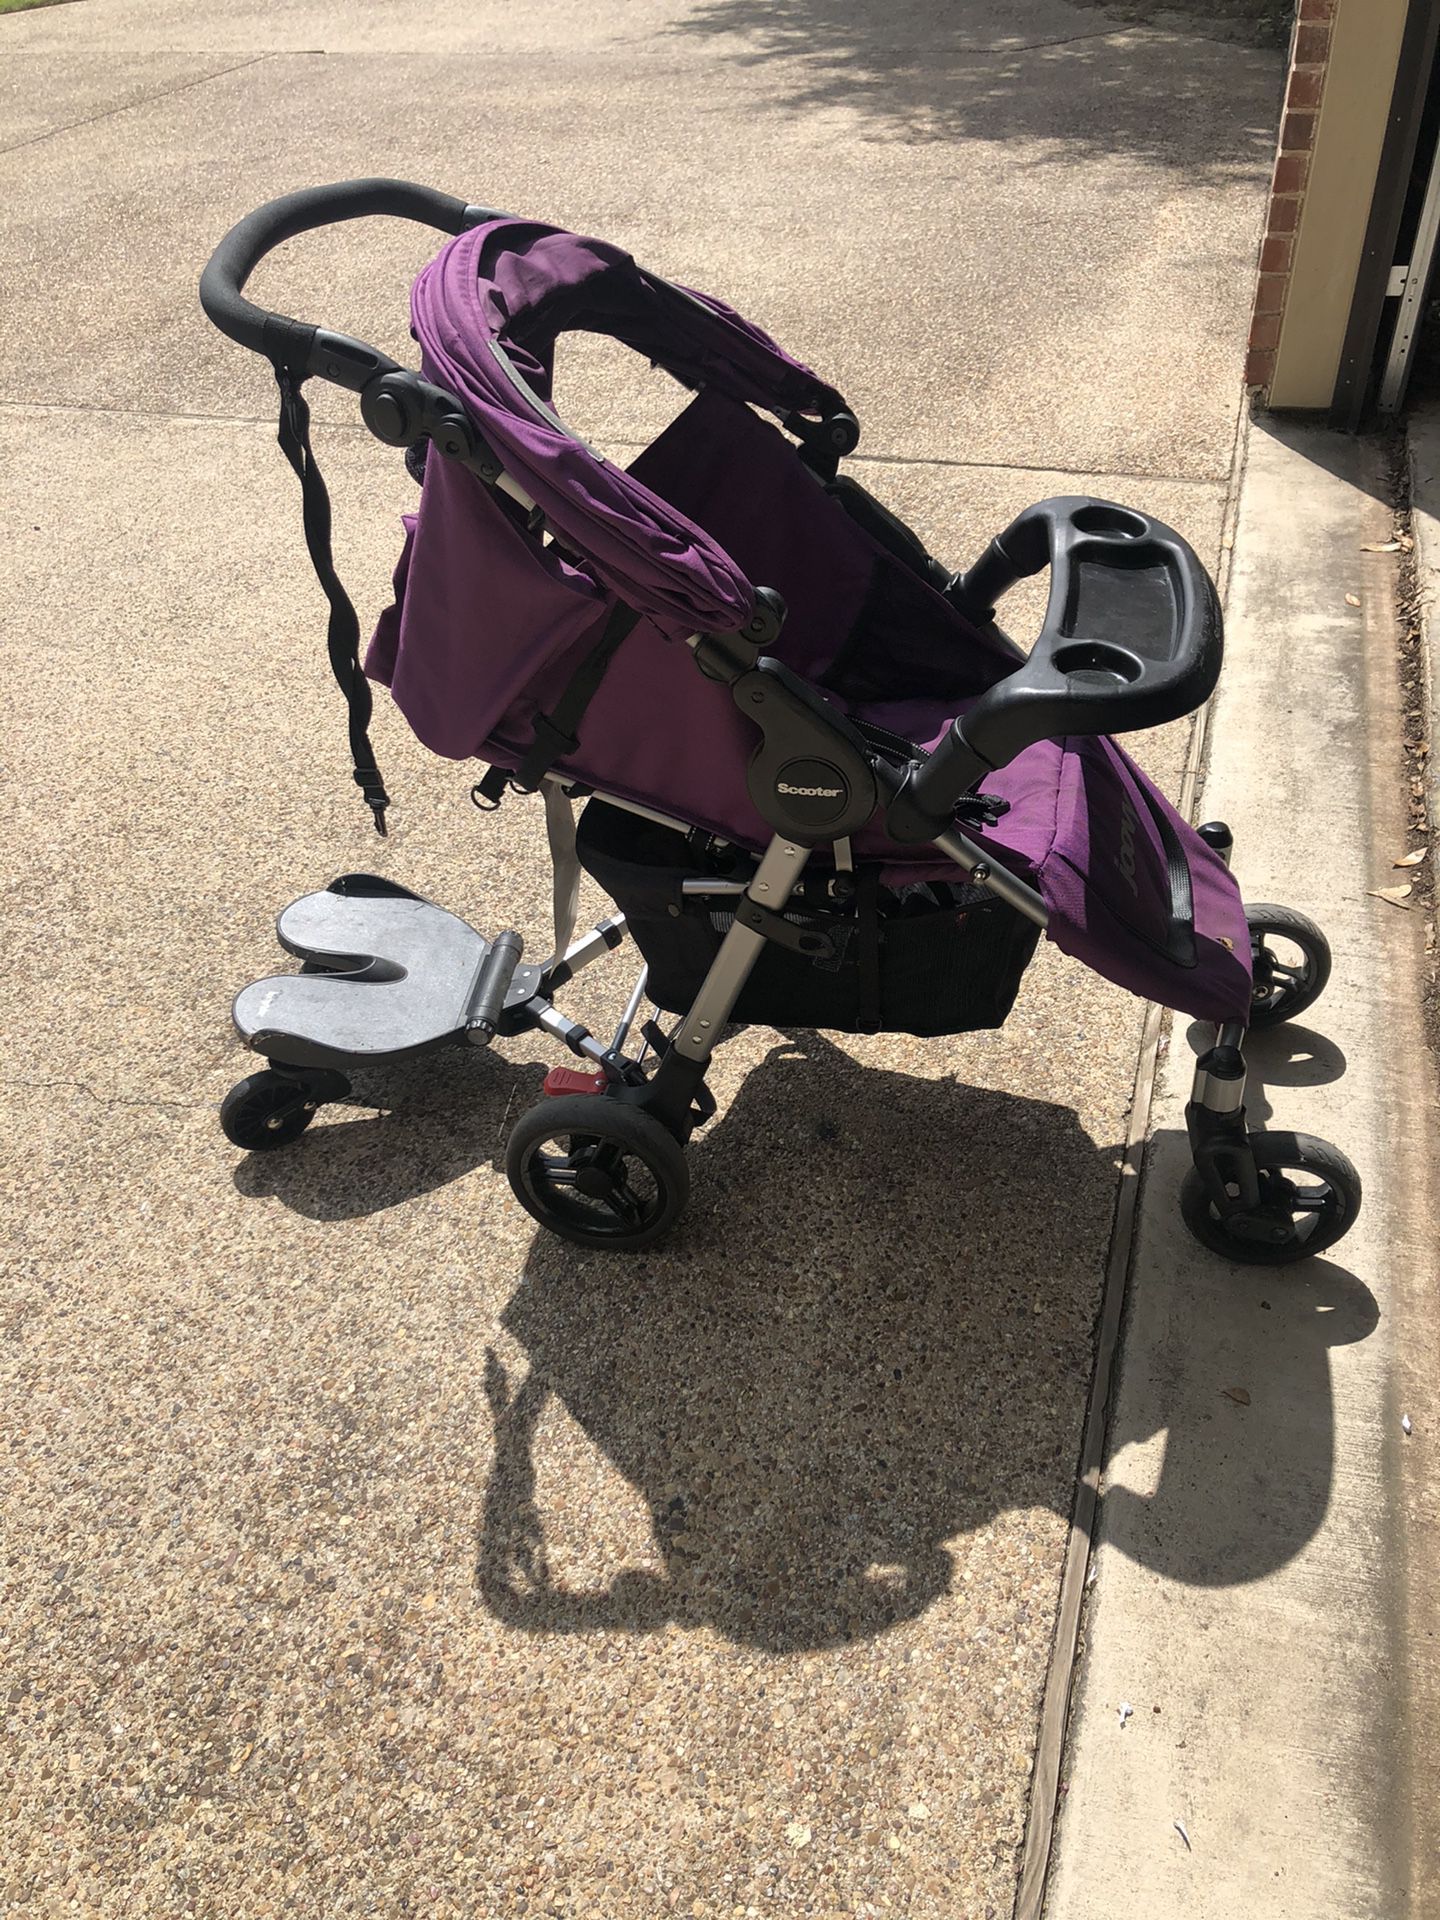 Joovy stroller with scooter attachment